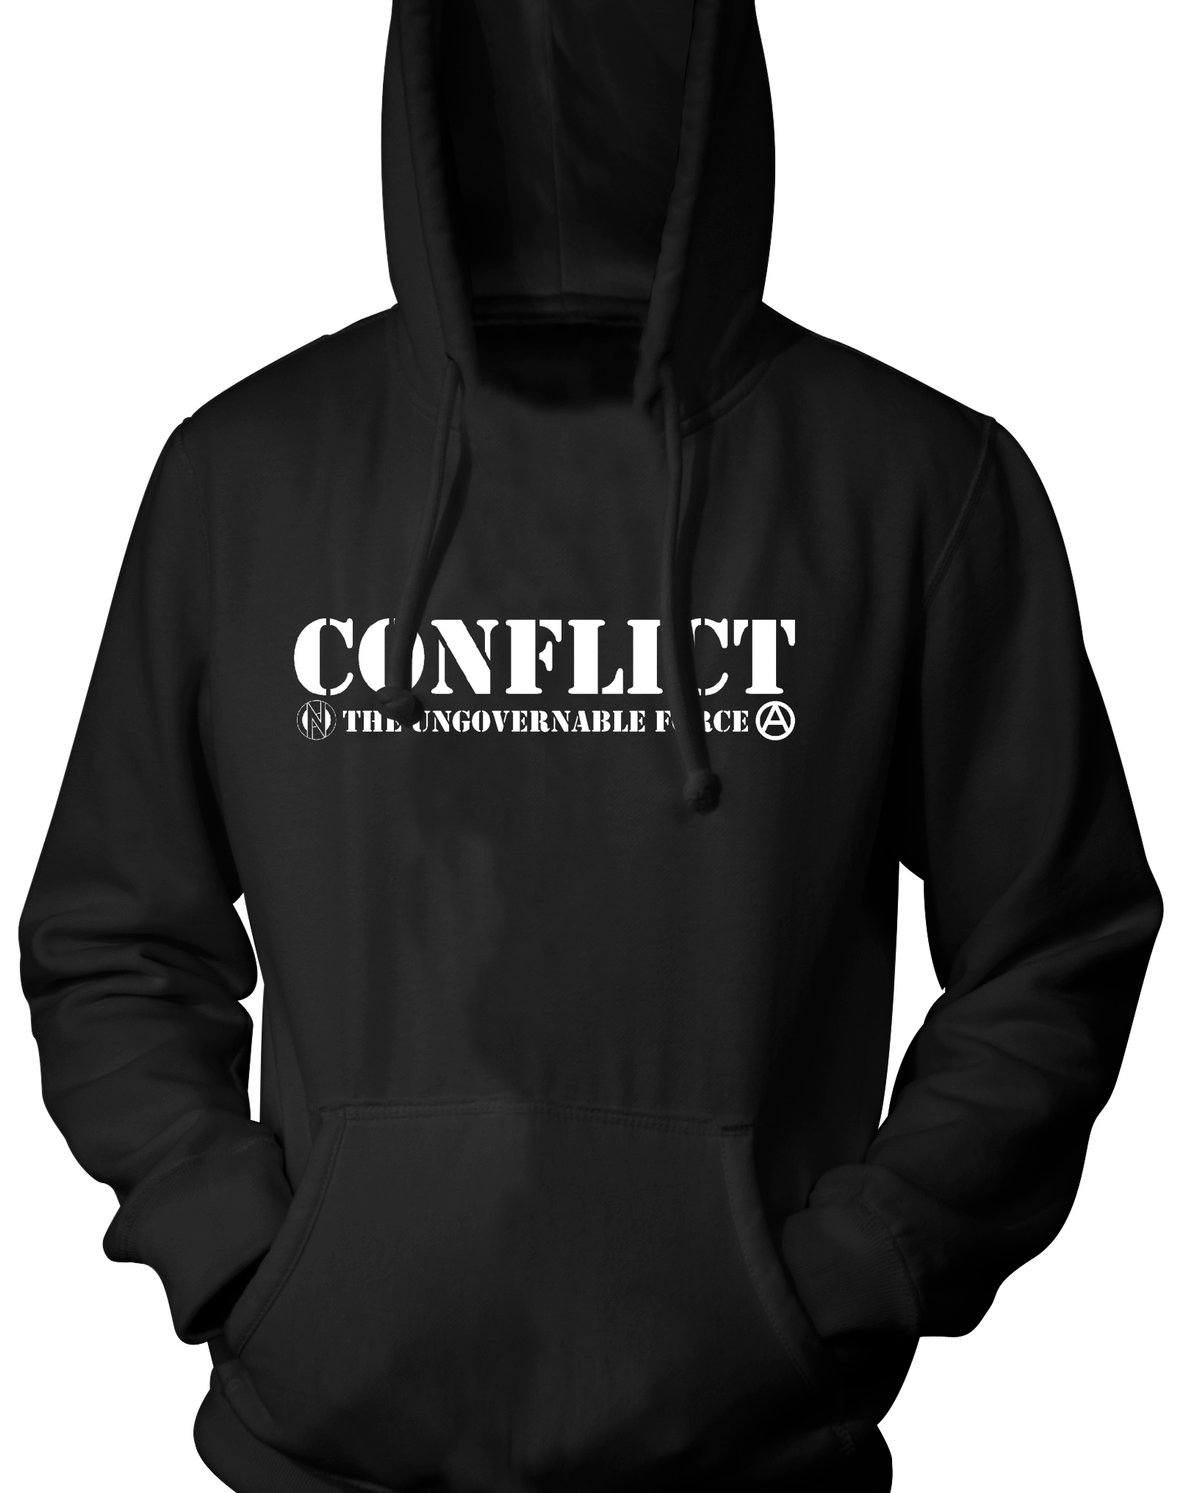 Image of Conflict Ungovernable Force Hoodie